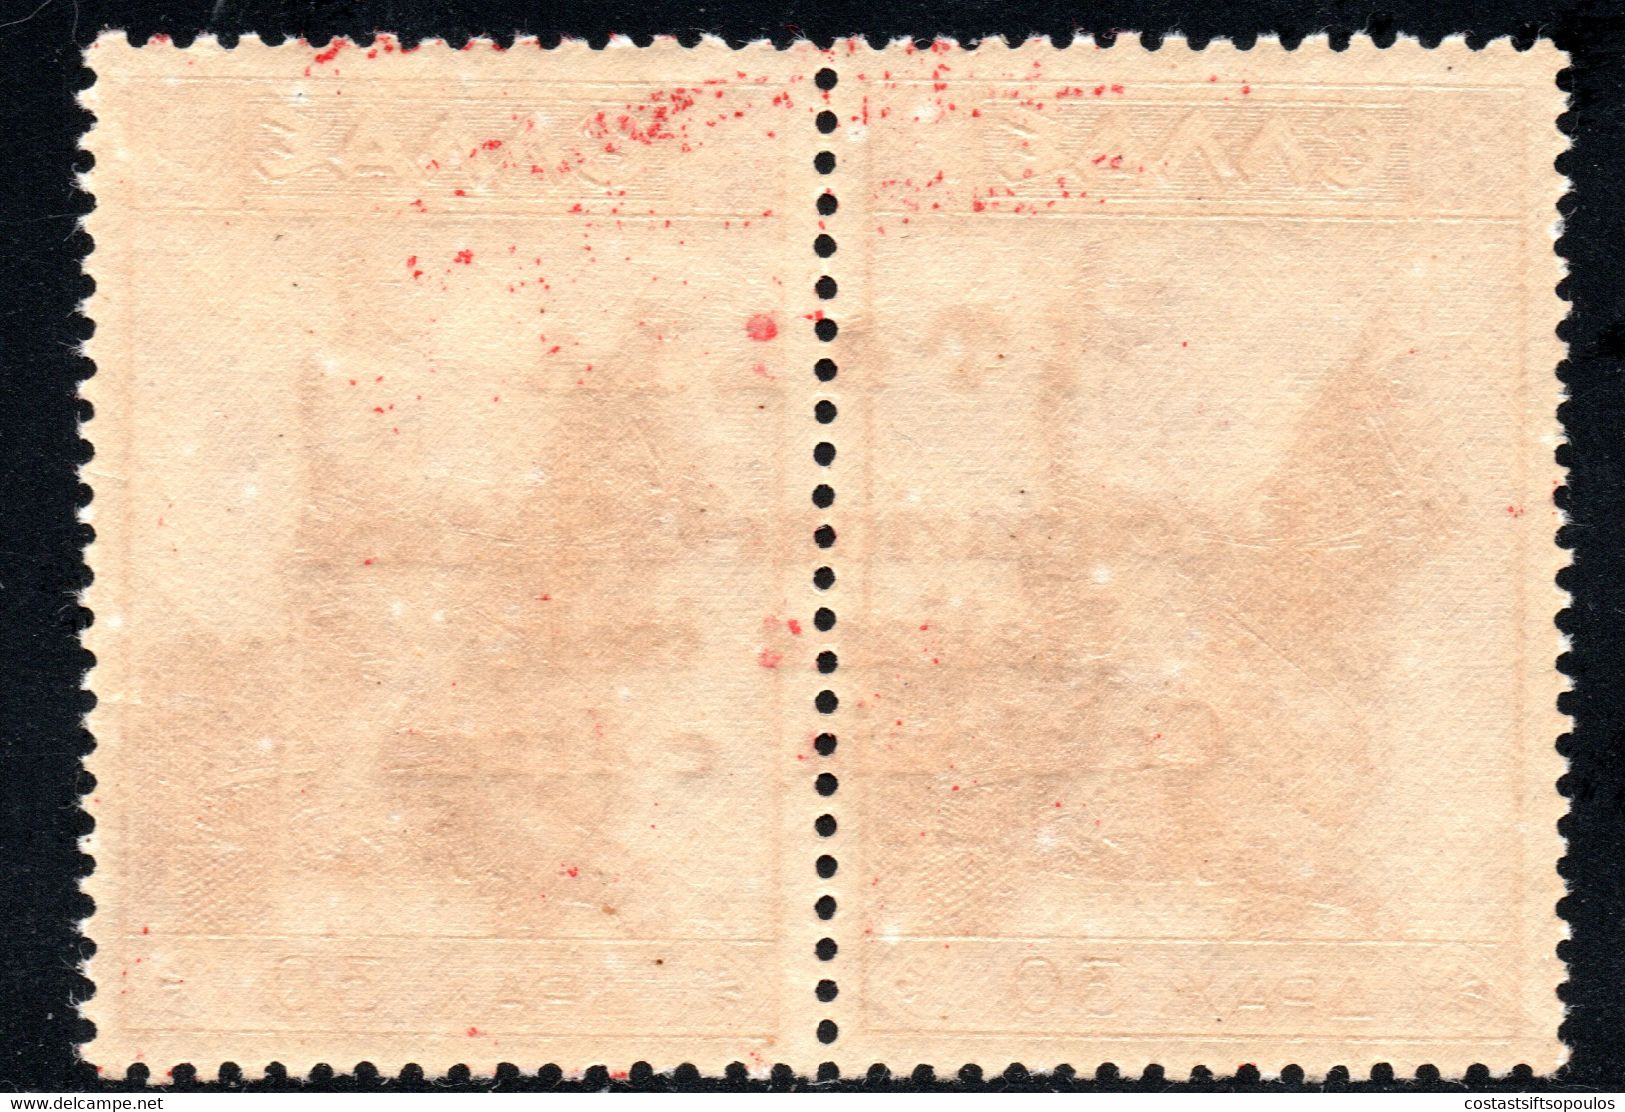 165.GREECE,ITALY,IONIAN,CEFALONIA,1941 30DR.RIDER,RED OVERPRINT???,MNH,POSSIBLY PRIVATE - Ionische Inseln